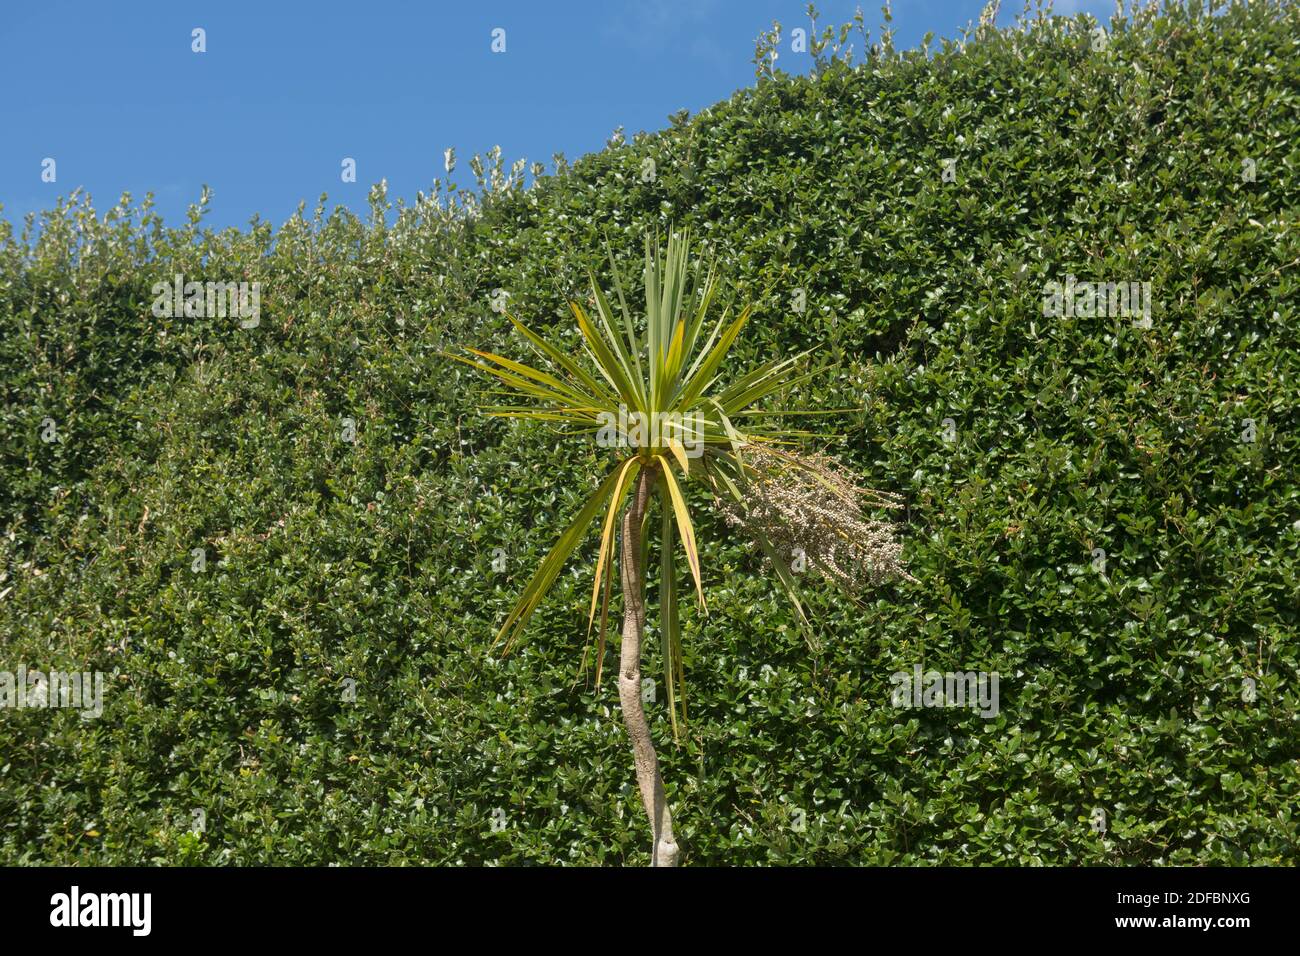 Green Foliage of a Cabbage Palm Tree (Cordyline australis) with a Bright Blue Sky Growing in a Garden on the Island of Tresco in the Isles of Scilly Stock Photo